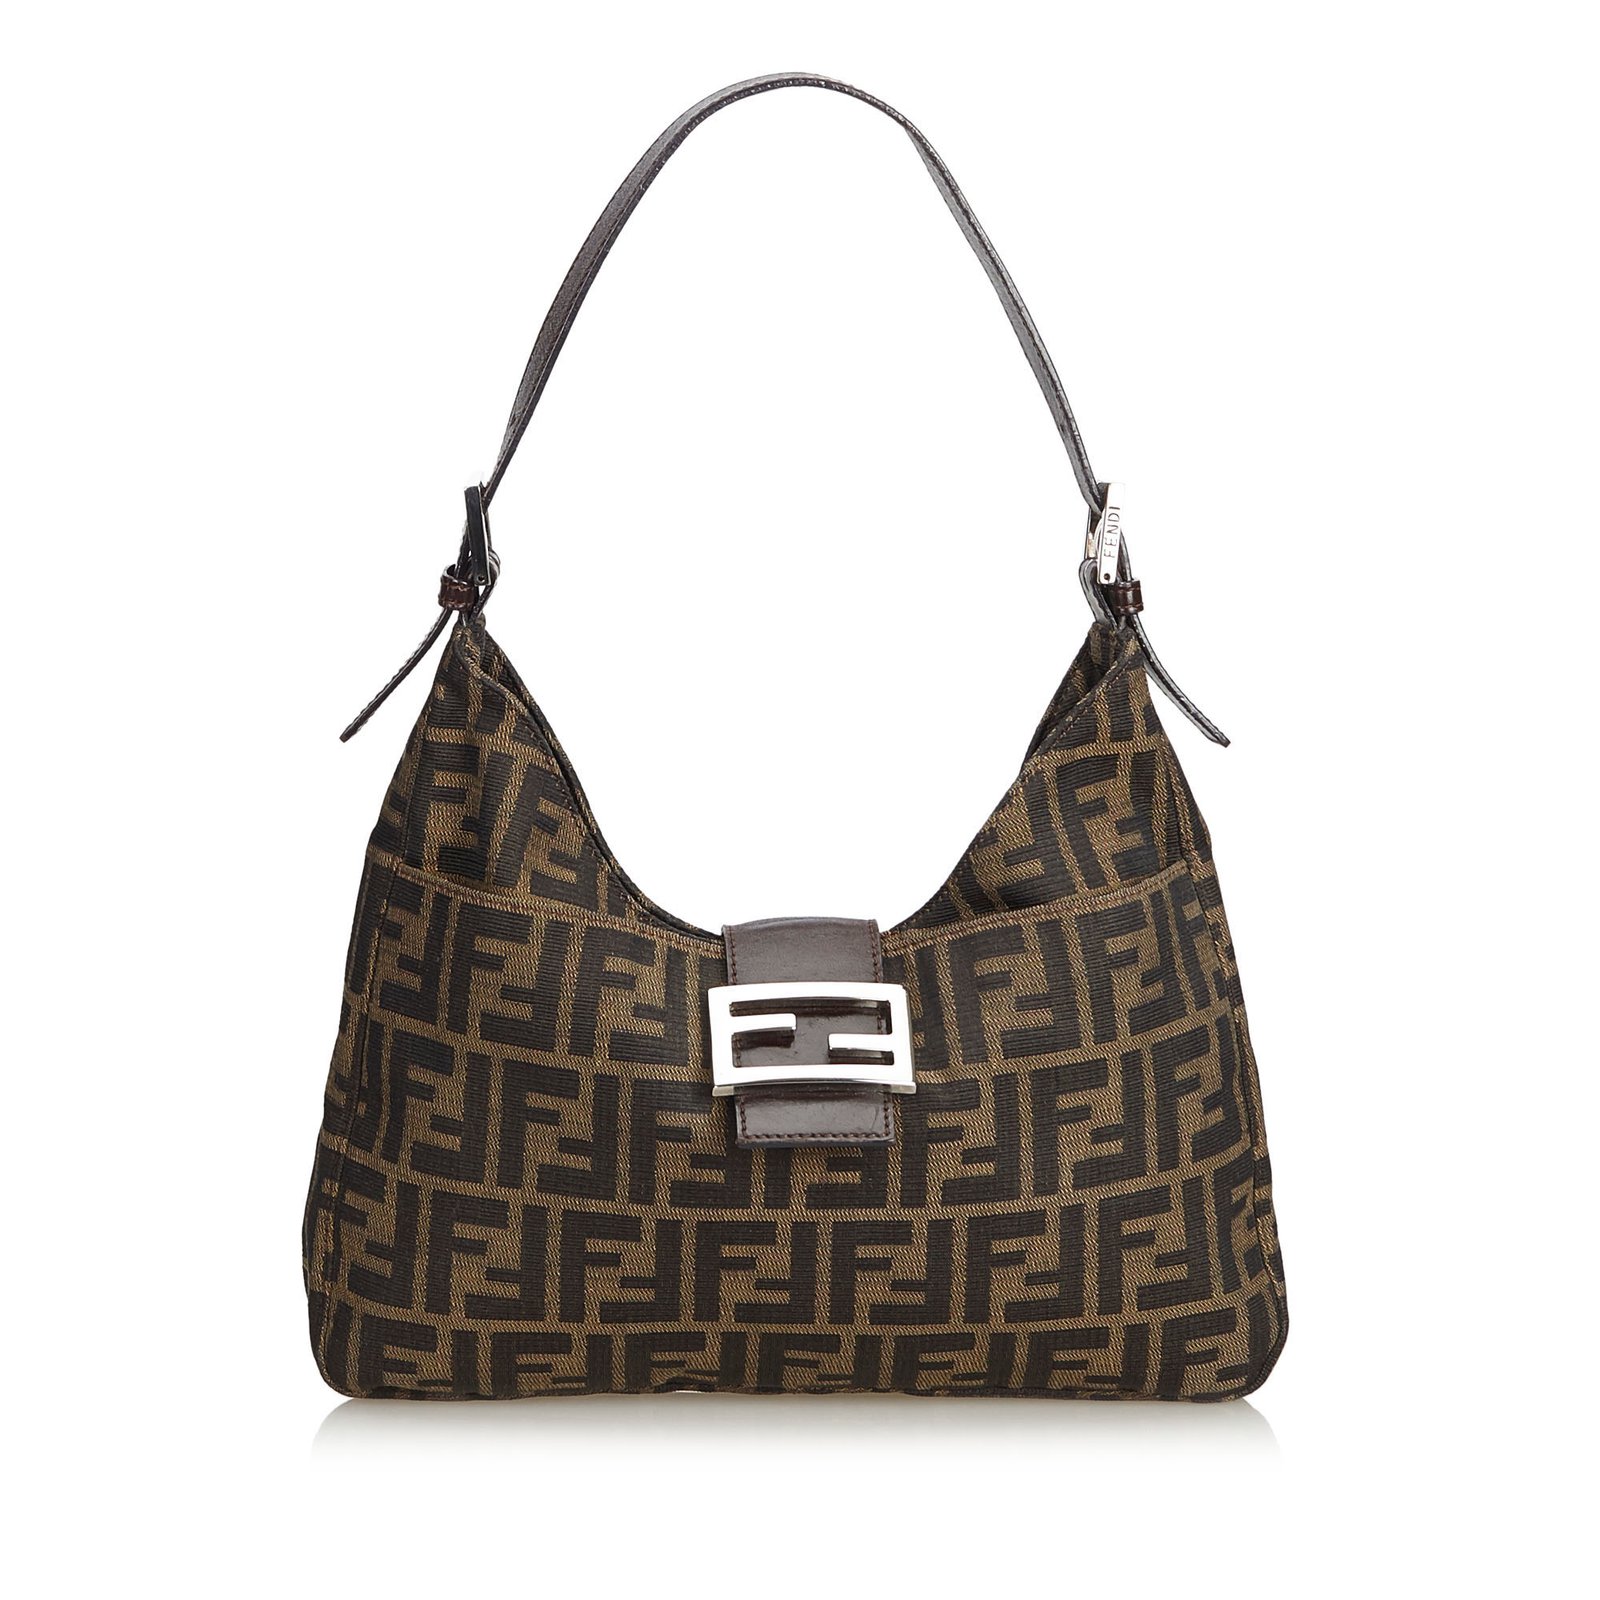 FENDI Zucca Canvas and Leather Bag